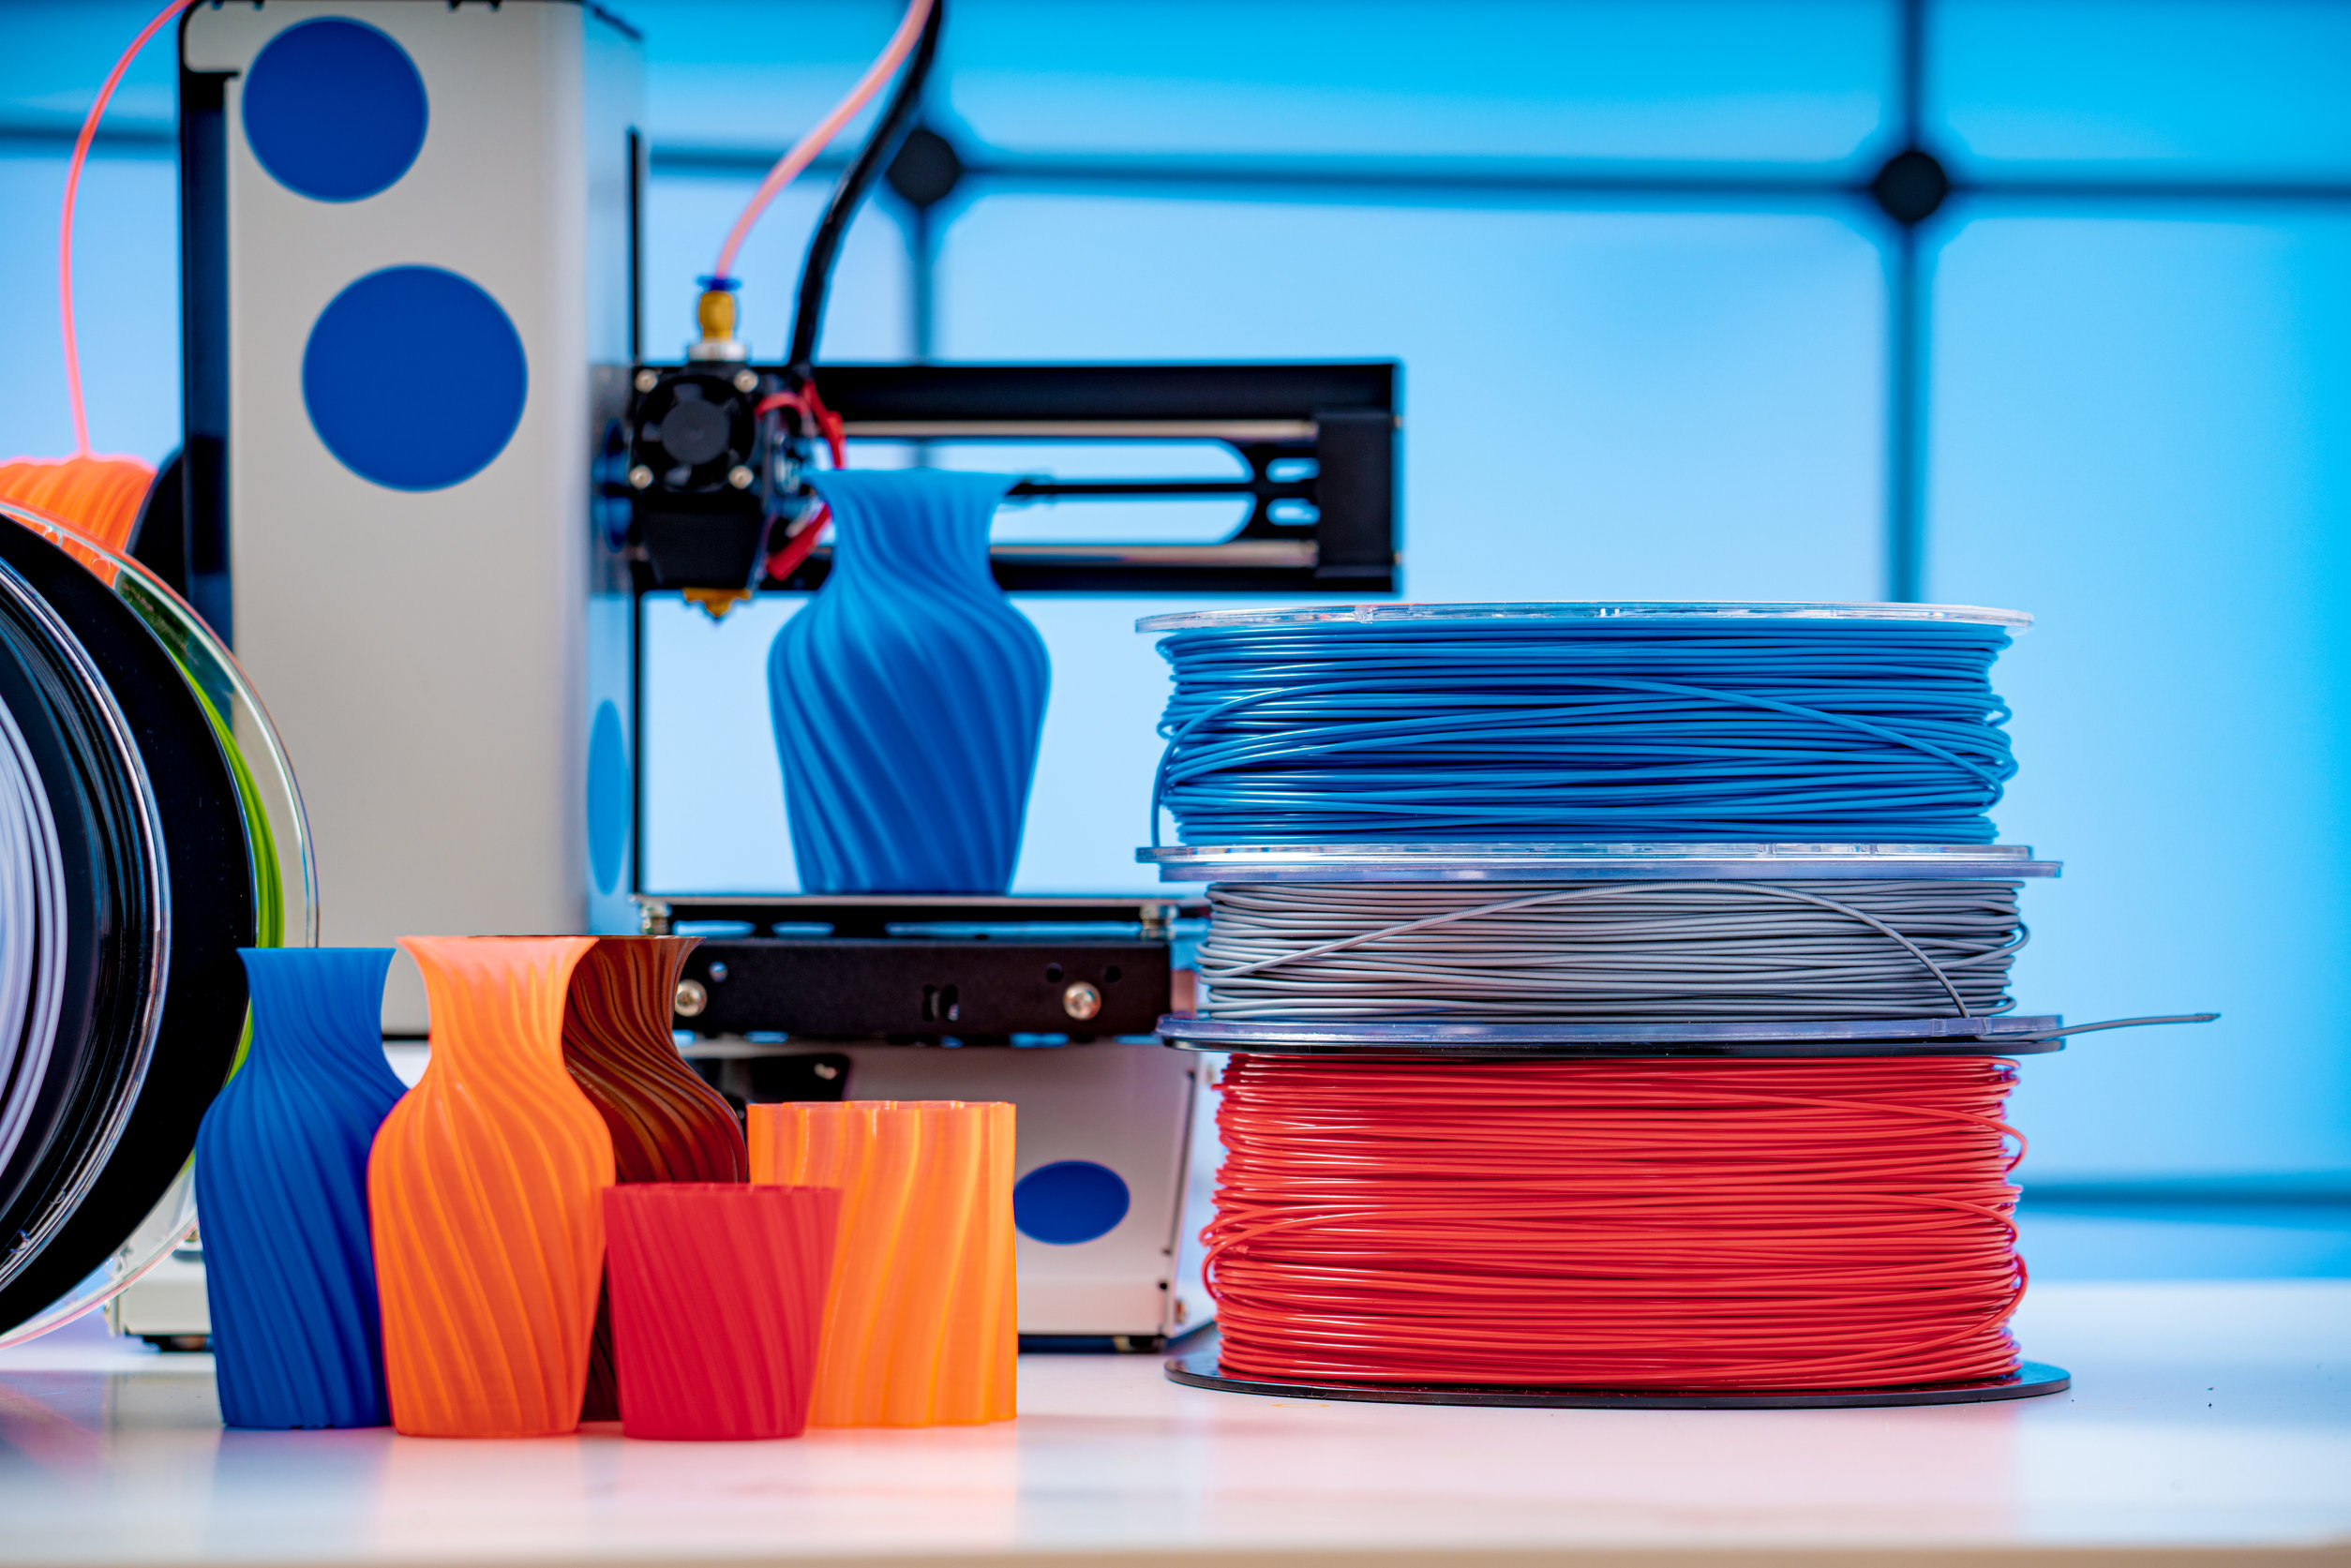 3D Printer Plastic filament for 3D printer and printed products